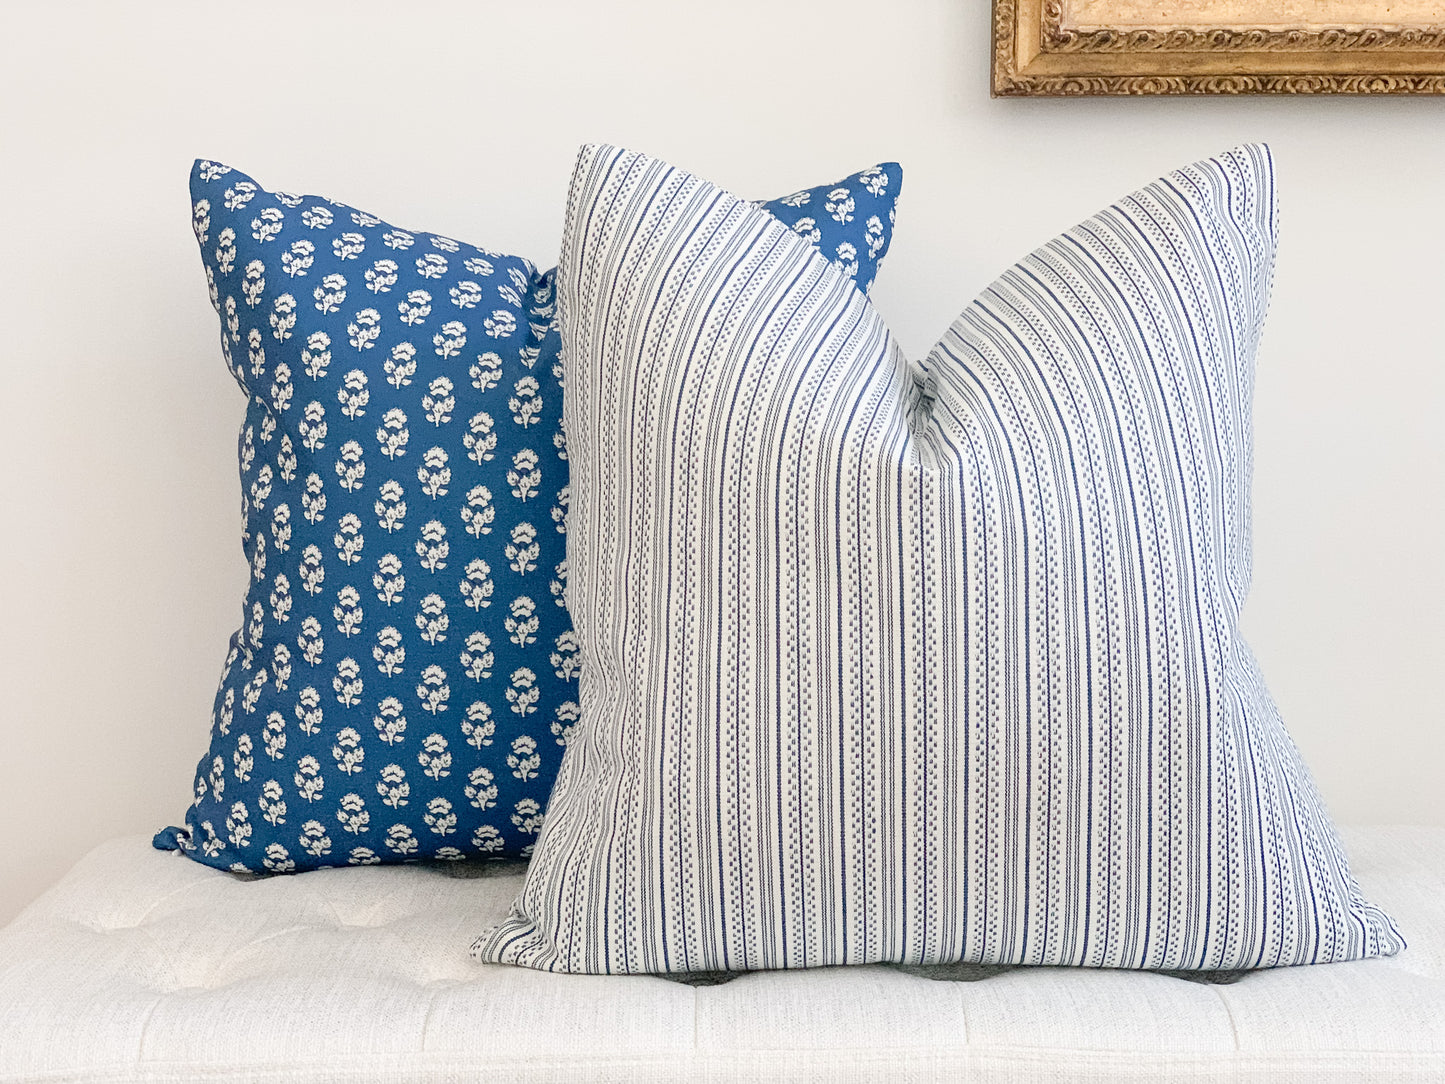 Blue and White Striped Pillow Cover - Navy